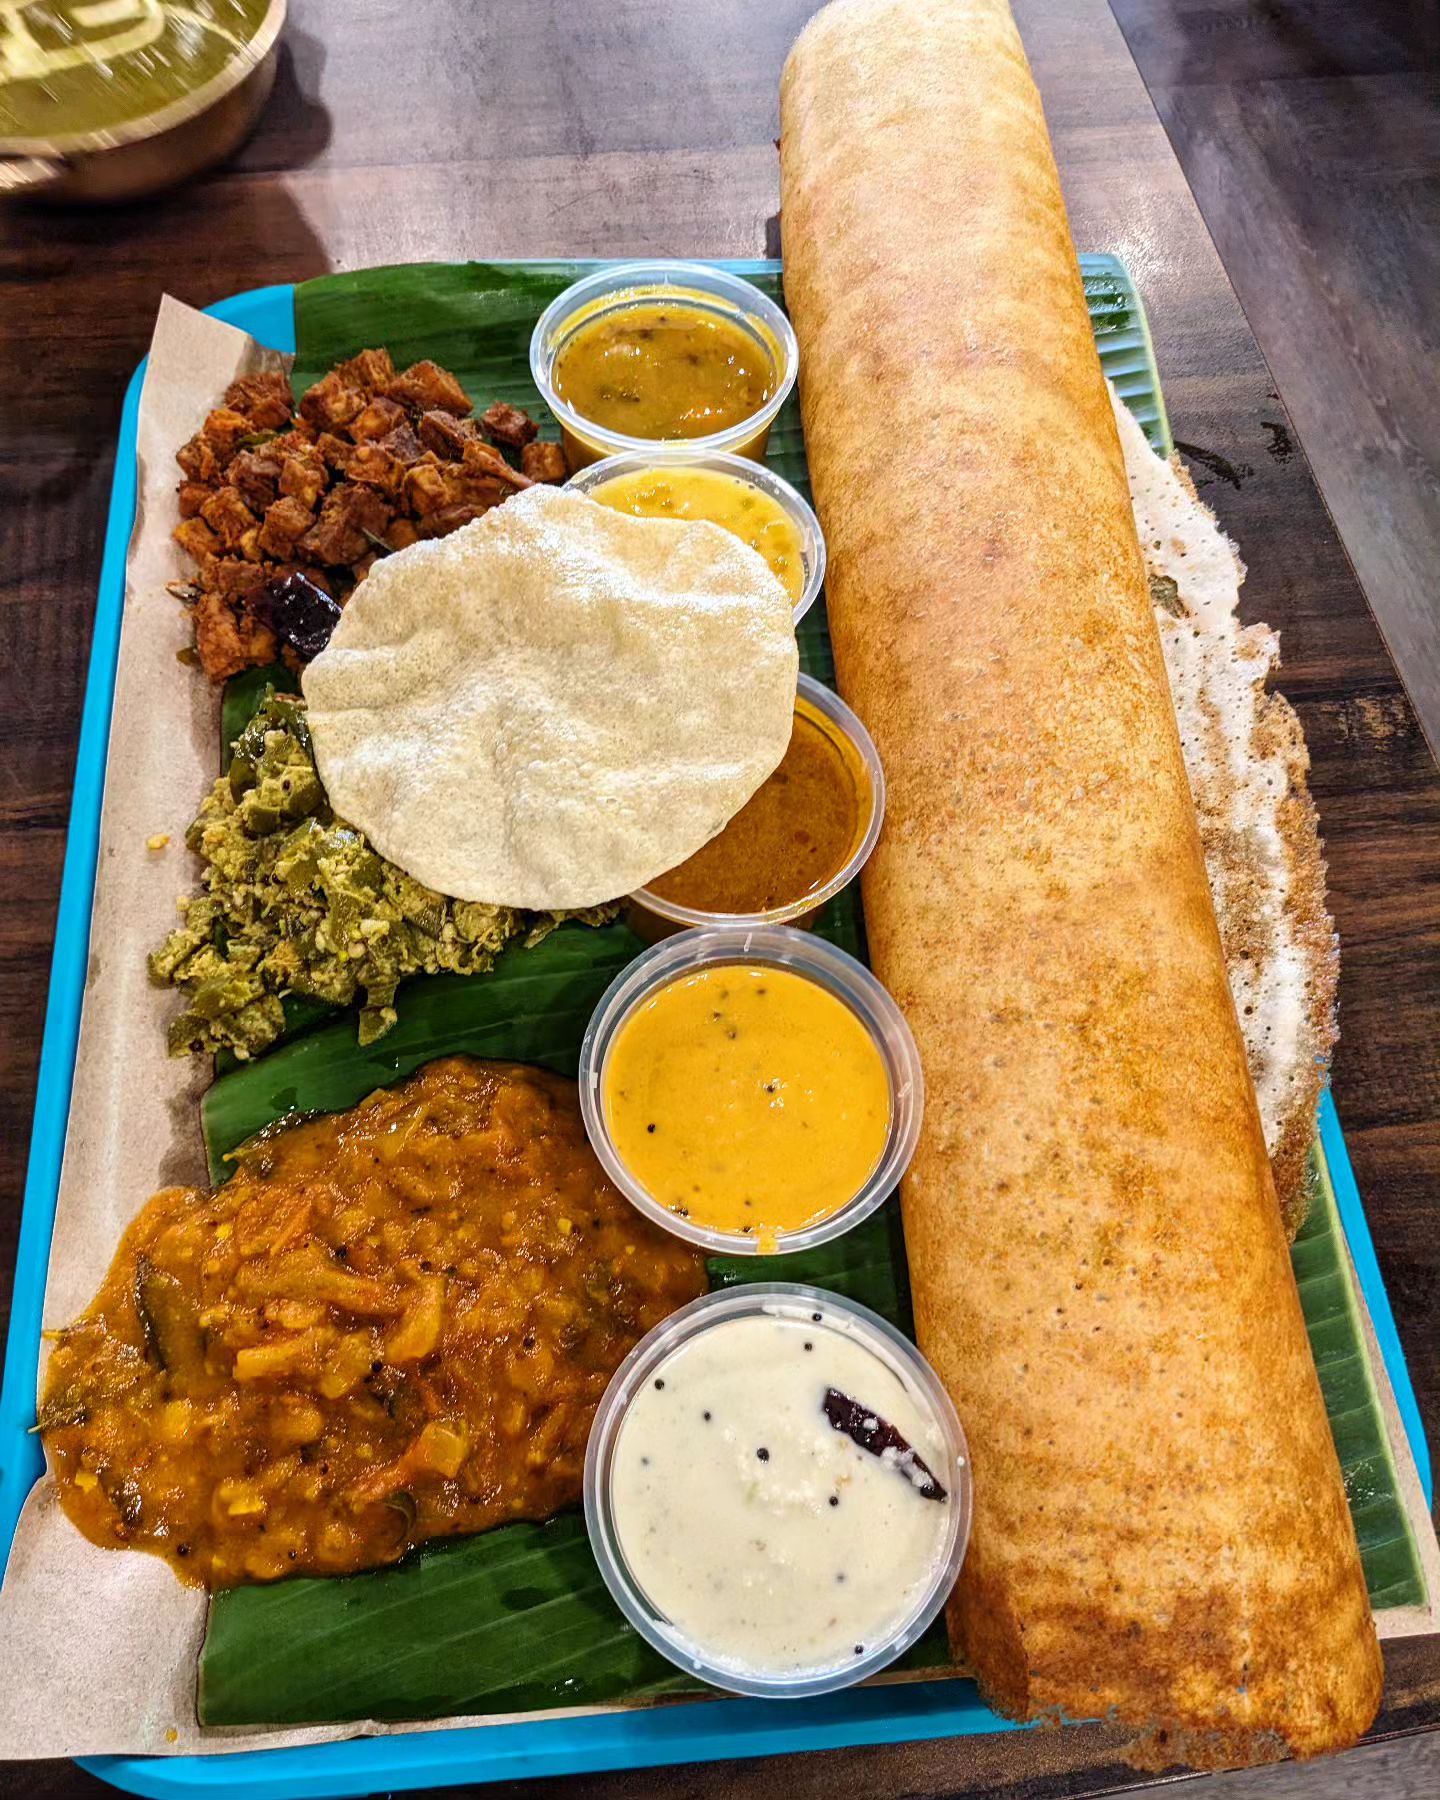 Things to do in Little India - Komala Vilas dosai